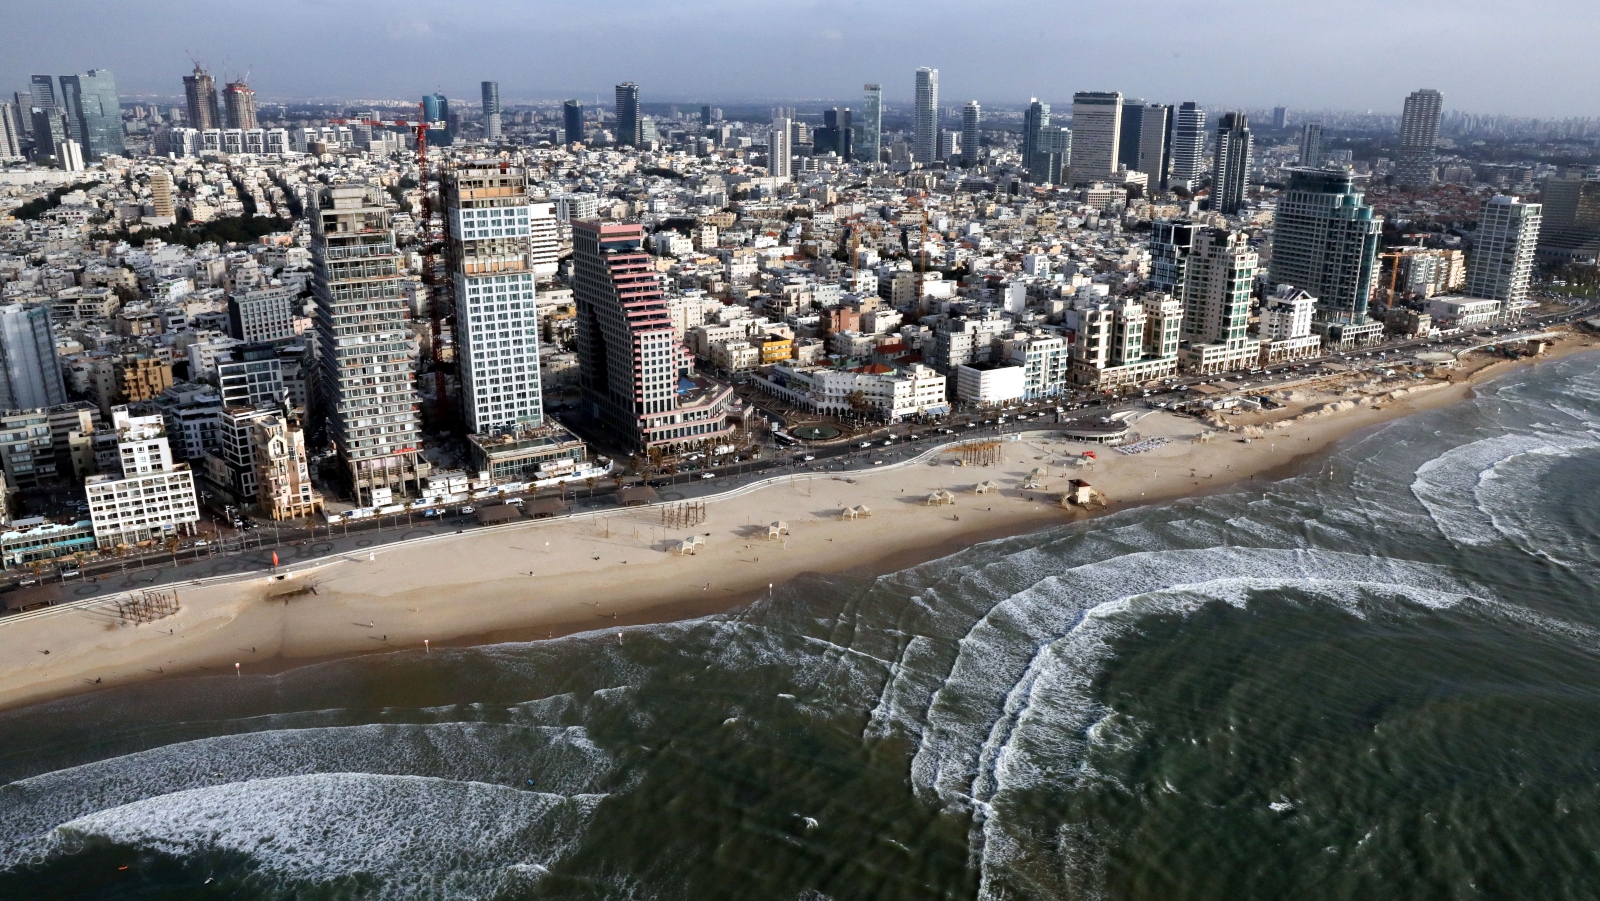 An aerial view of the beaches and city skyline in Tel Aviv. Photo by Yossi Zamir/Flash90